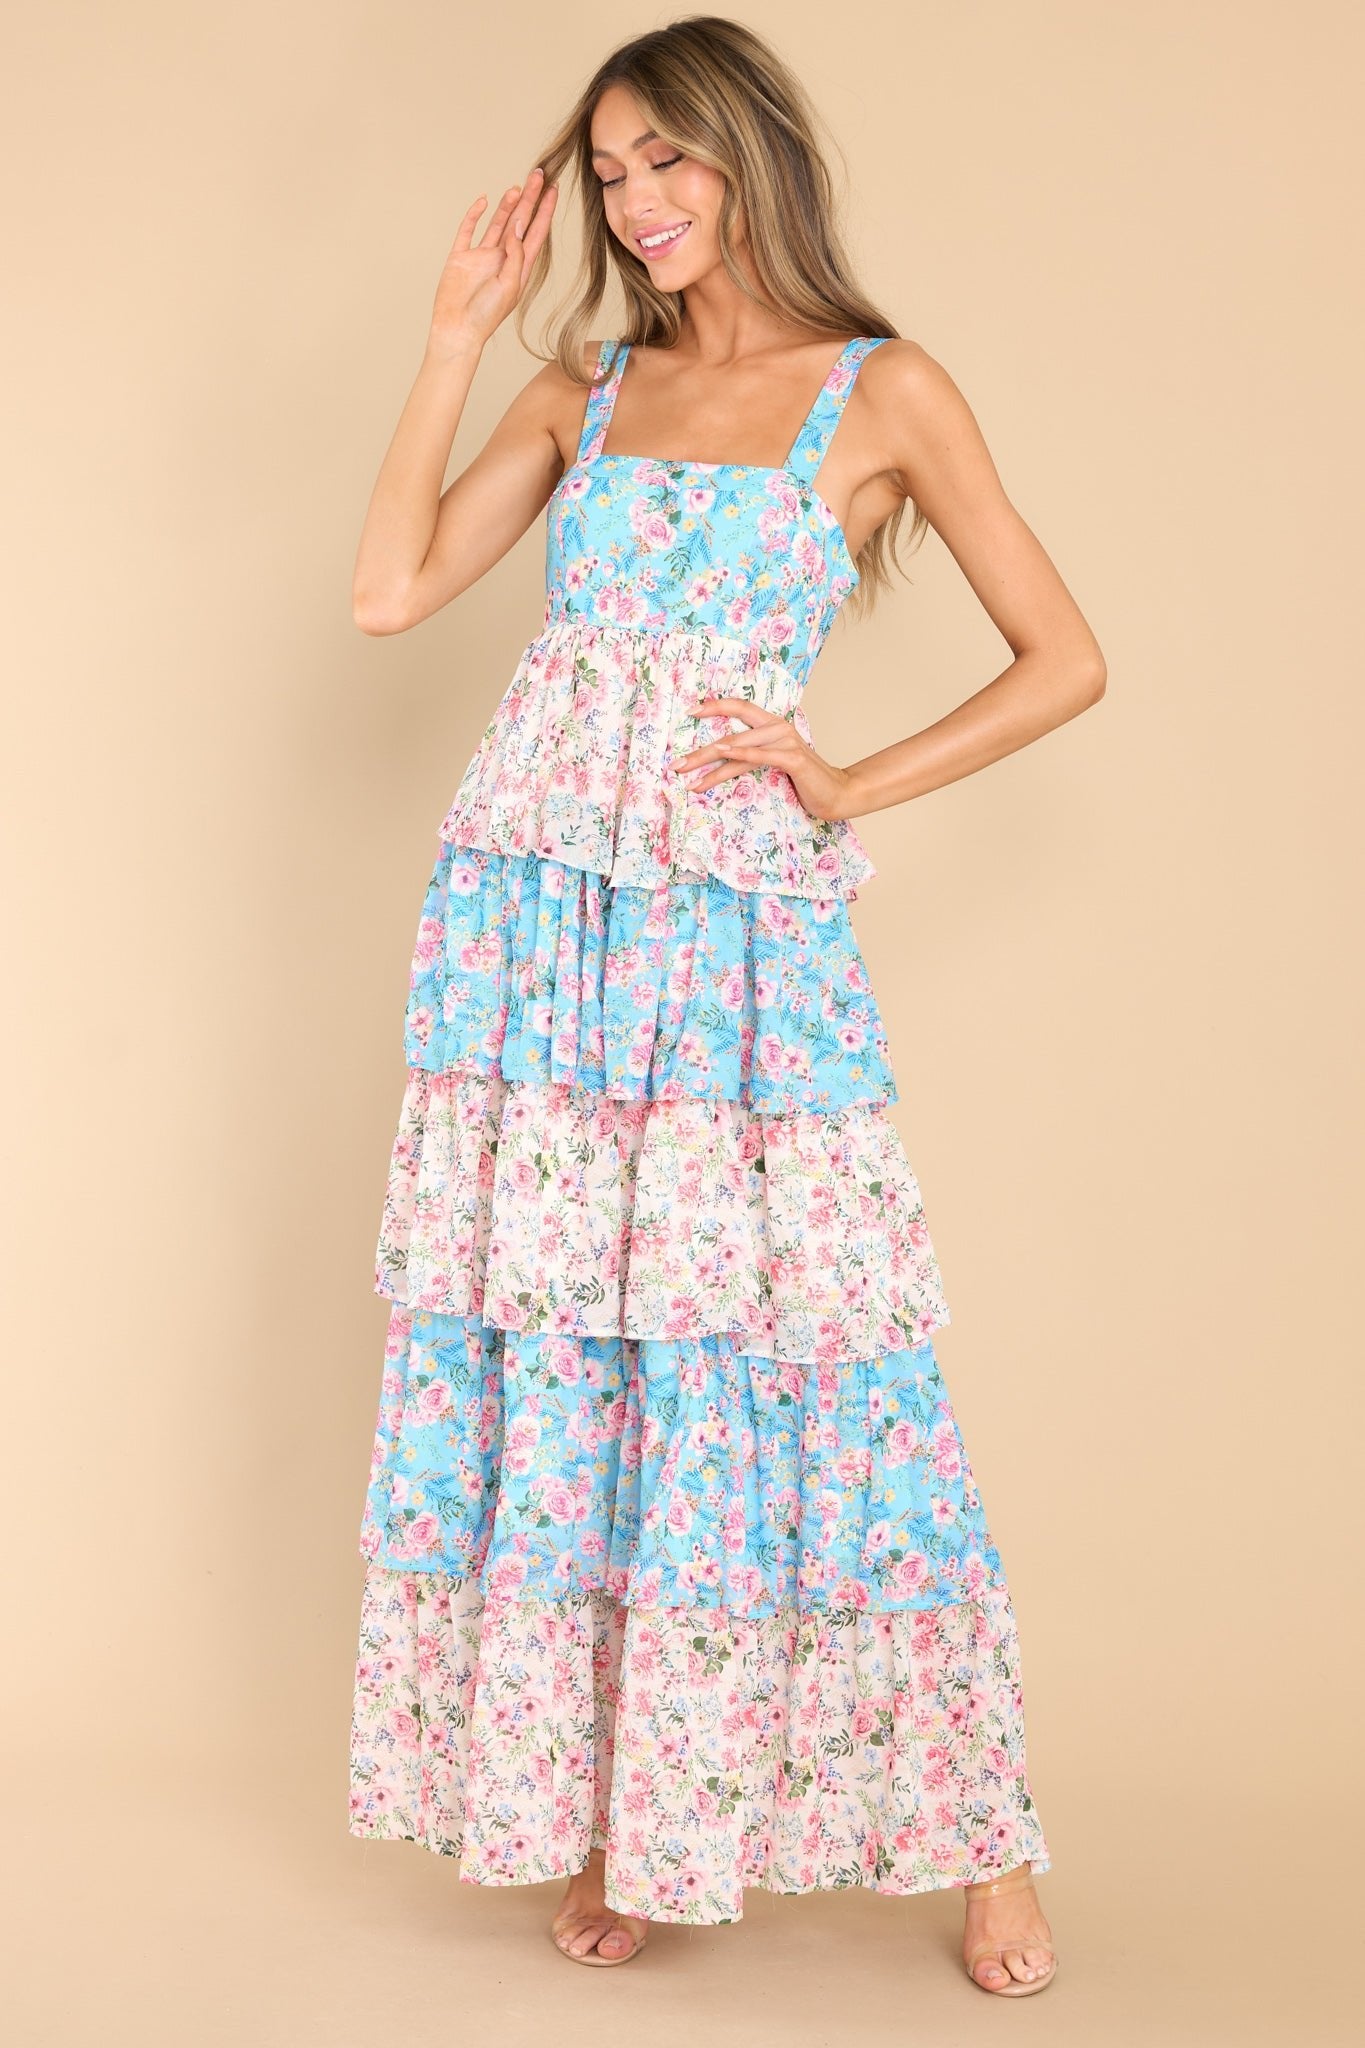 On the Edge of Spring Blue Floral Print Maxi Dress - Red Dress